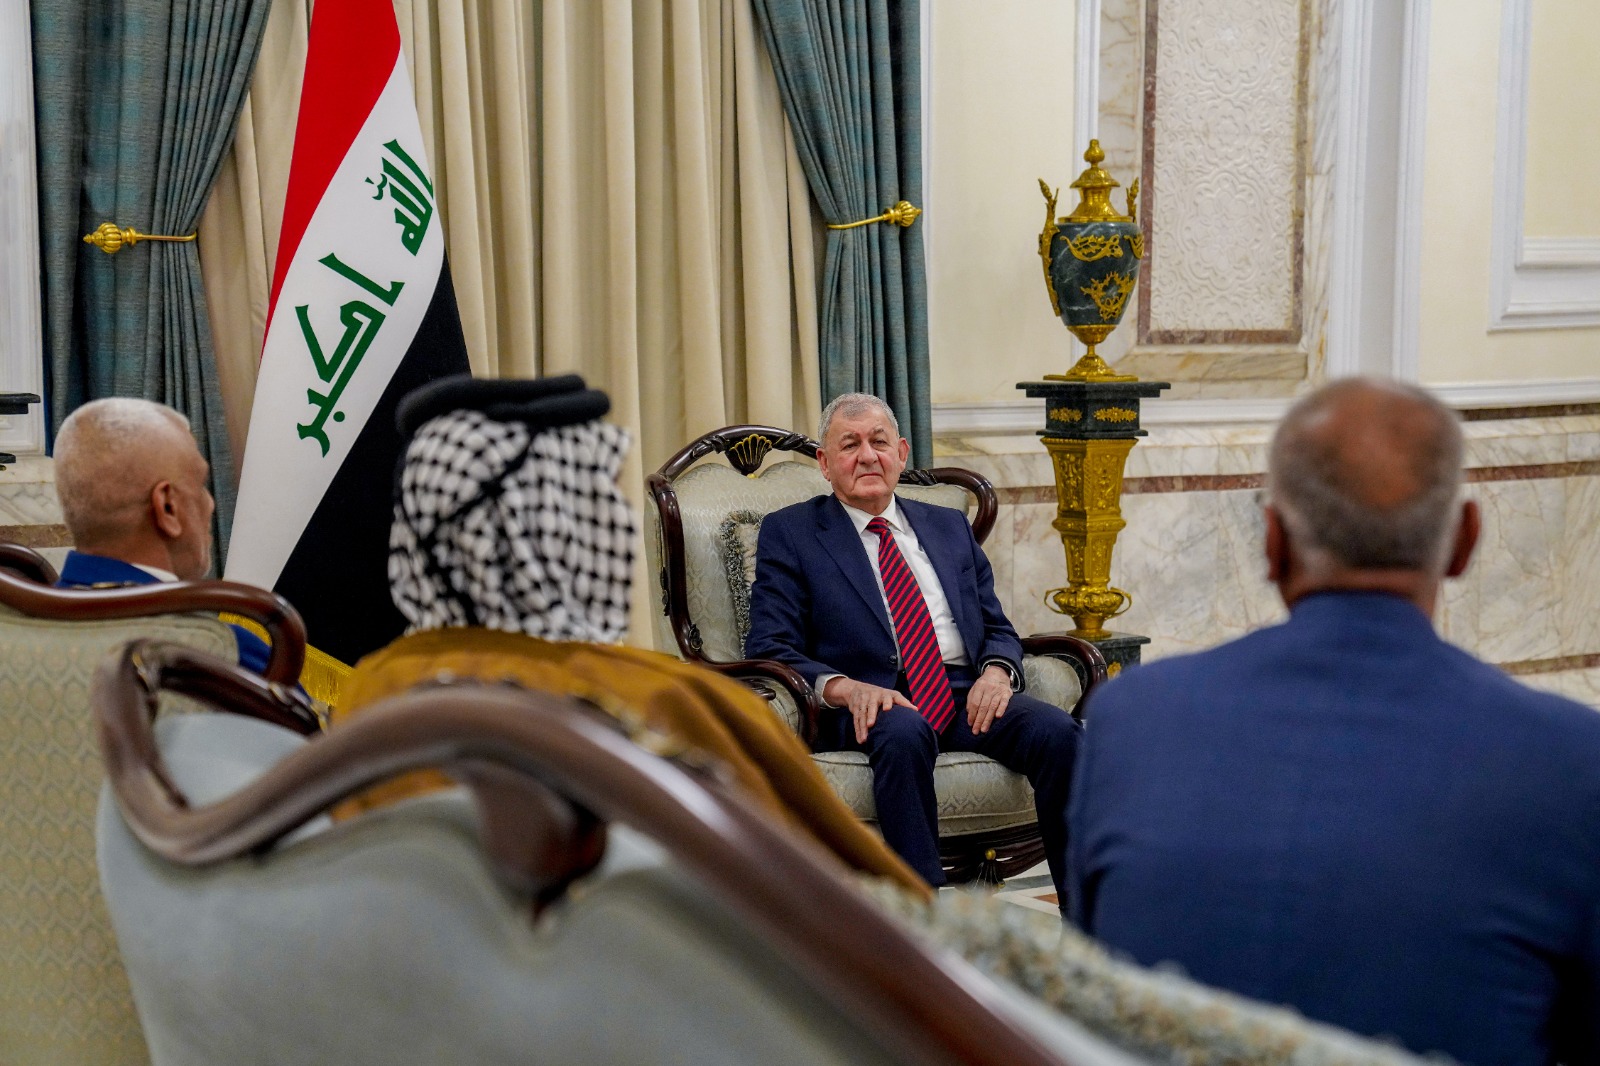 Iraq's president: the new exchange rate would boost the dinar's value